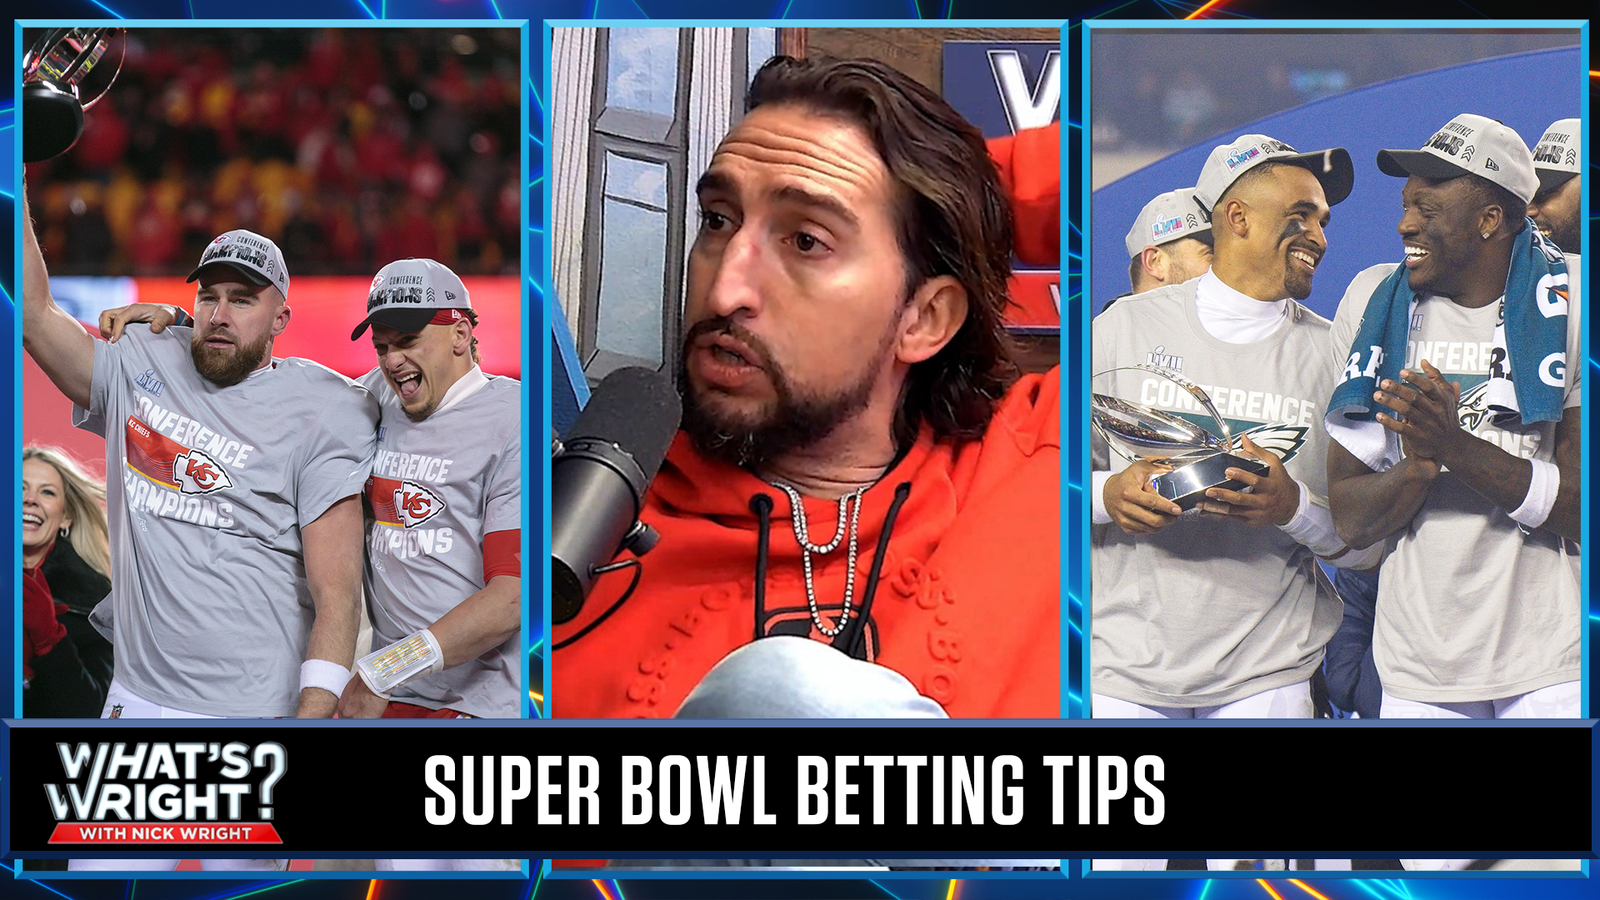 Nick shares his Super Bowl betting 101 tips 